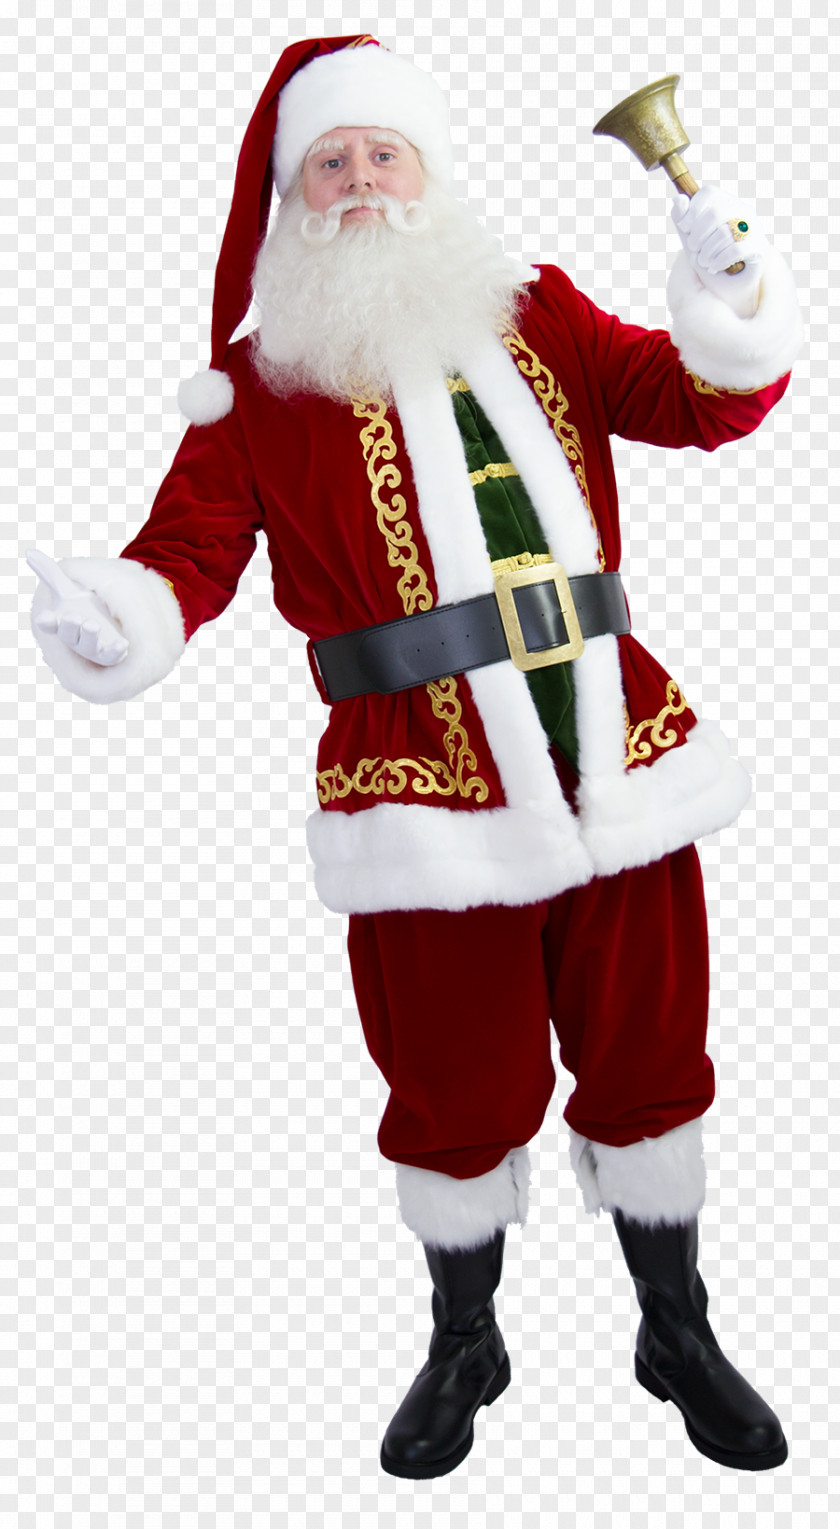 Santa Claus Costume Christmas Ornament Sled PNG